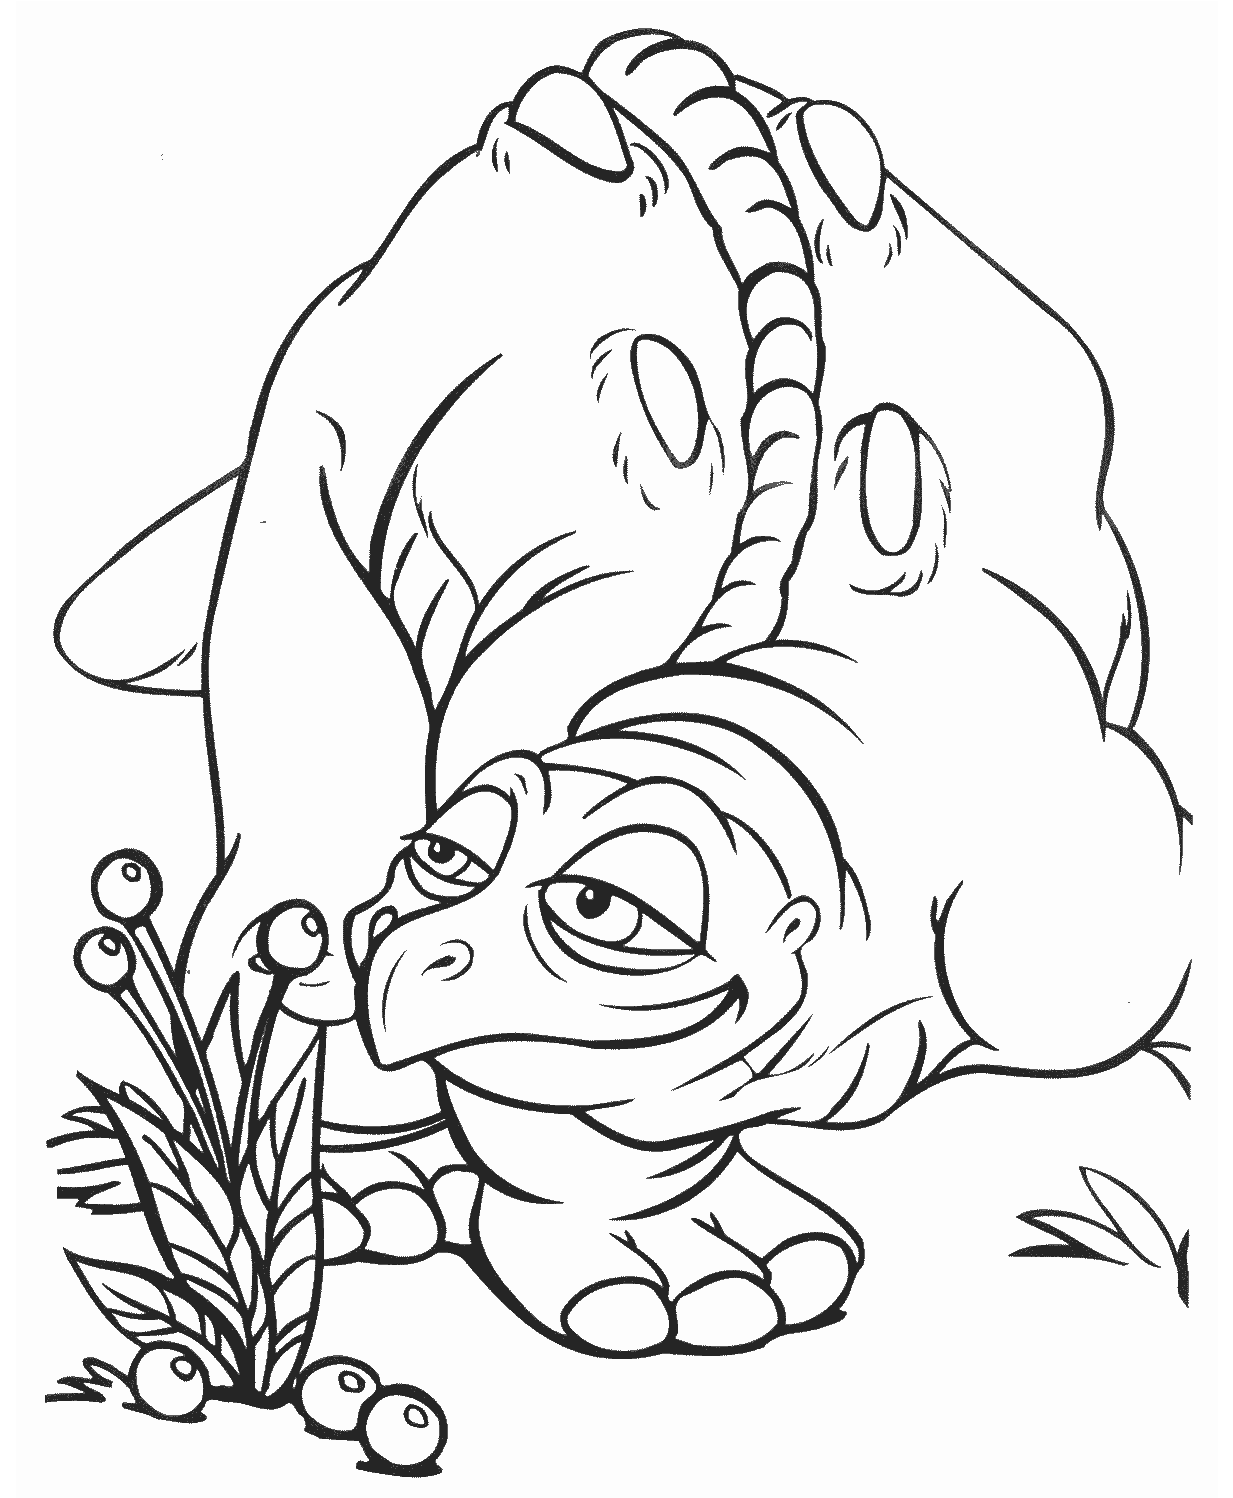 Dinosaur Lf6 Animals Coloring Pages